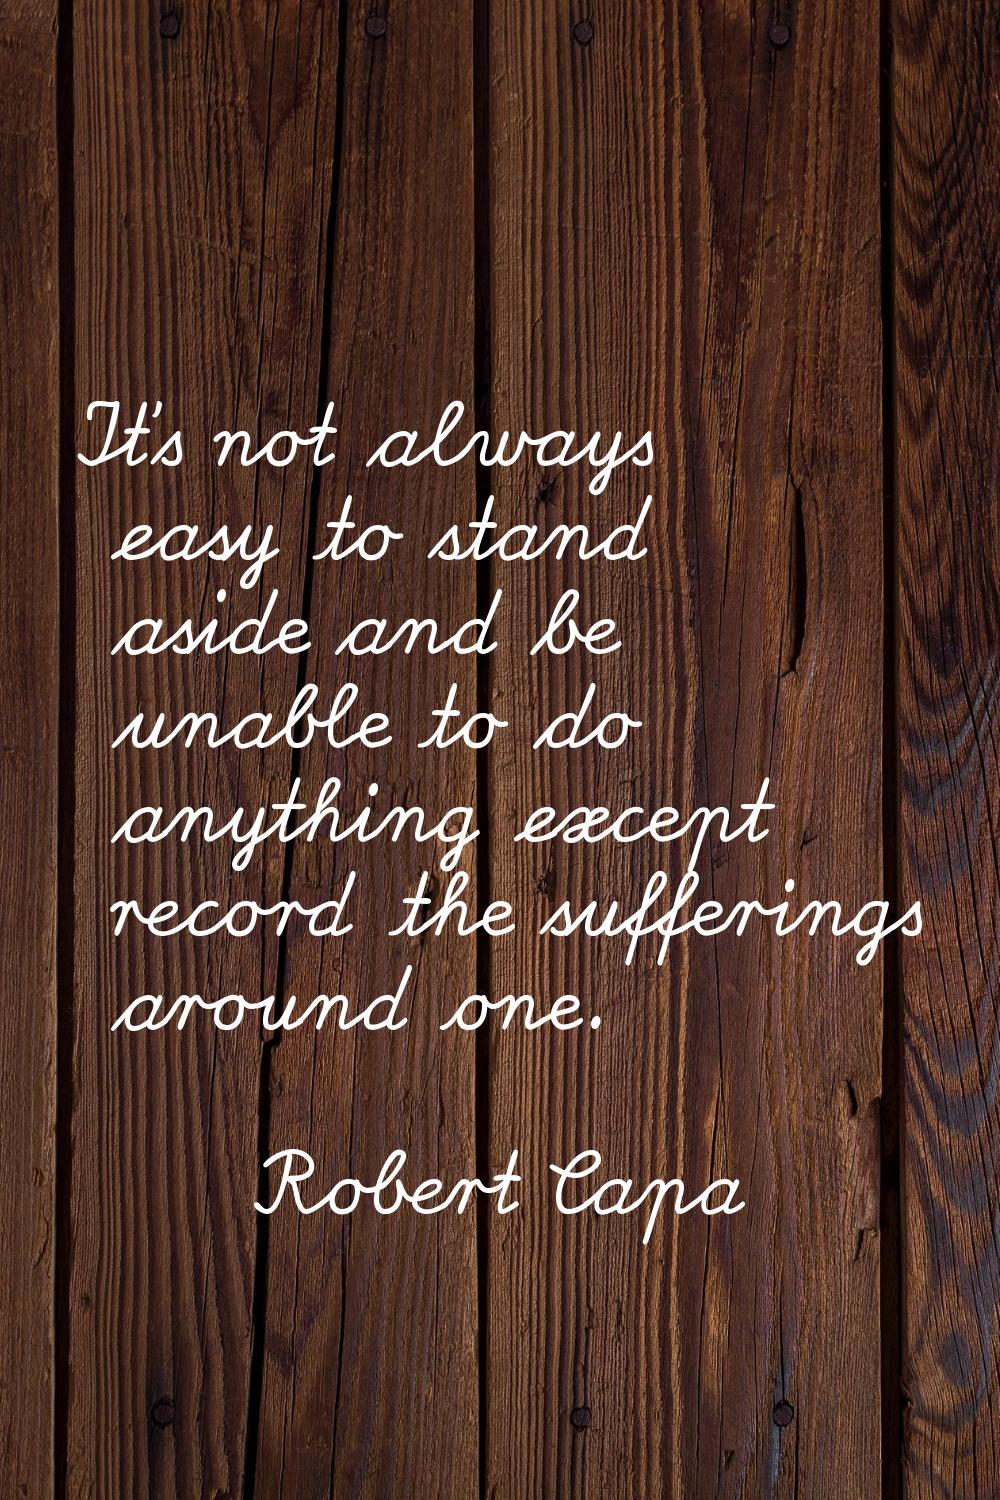 It's not always easy to stand aside and be unable to do anything except record the sufferings aroun